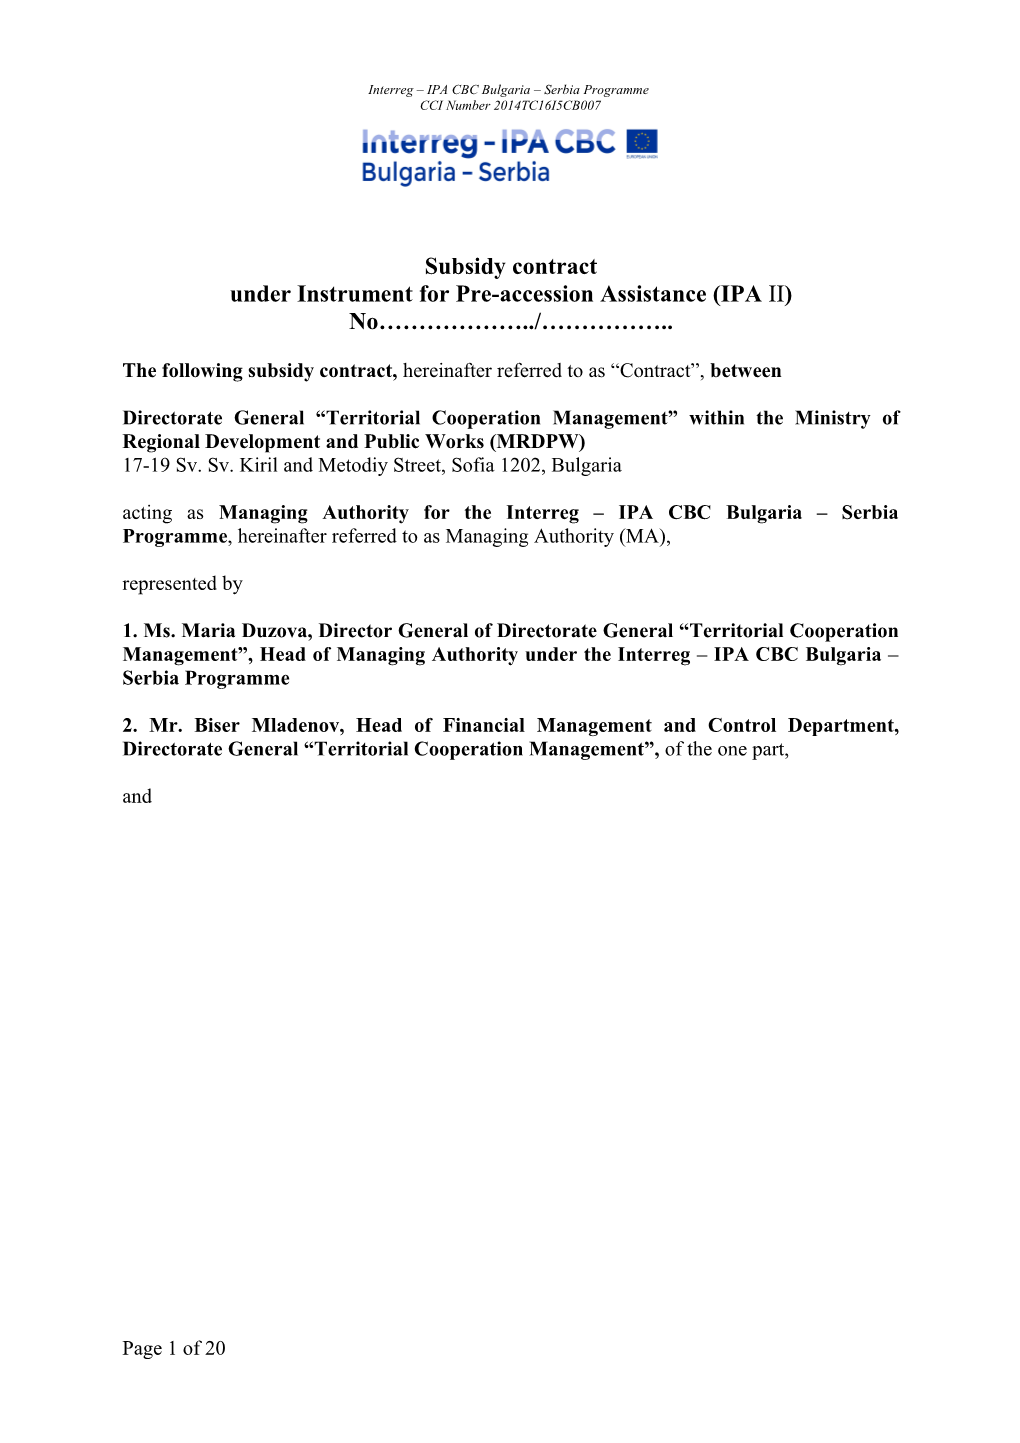 Under Instrument for Pre-Accession Assistance (IPA II)